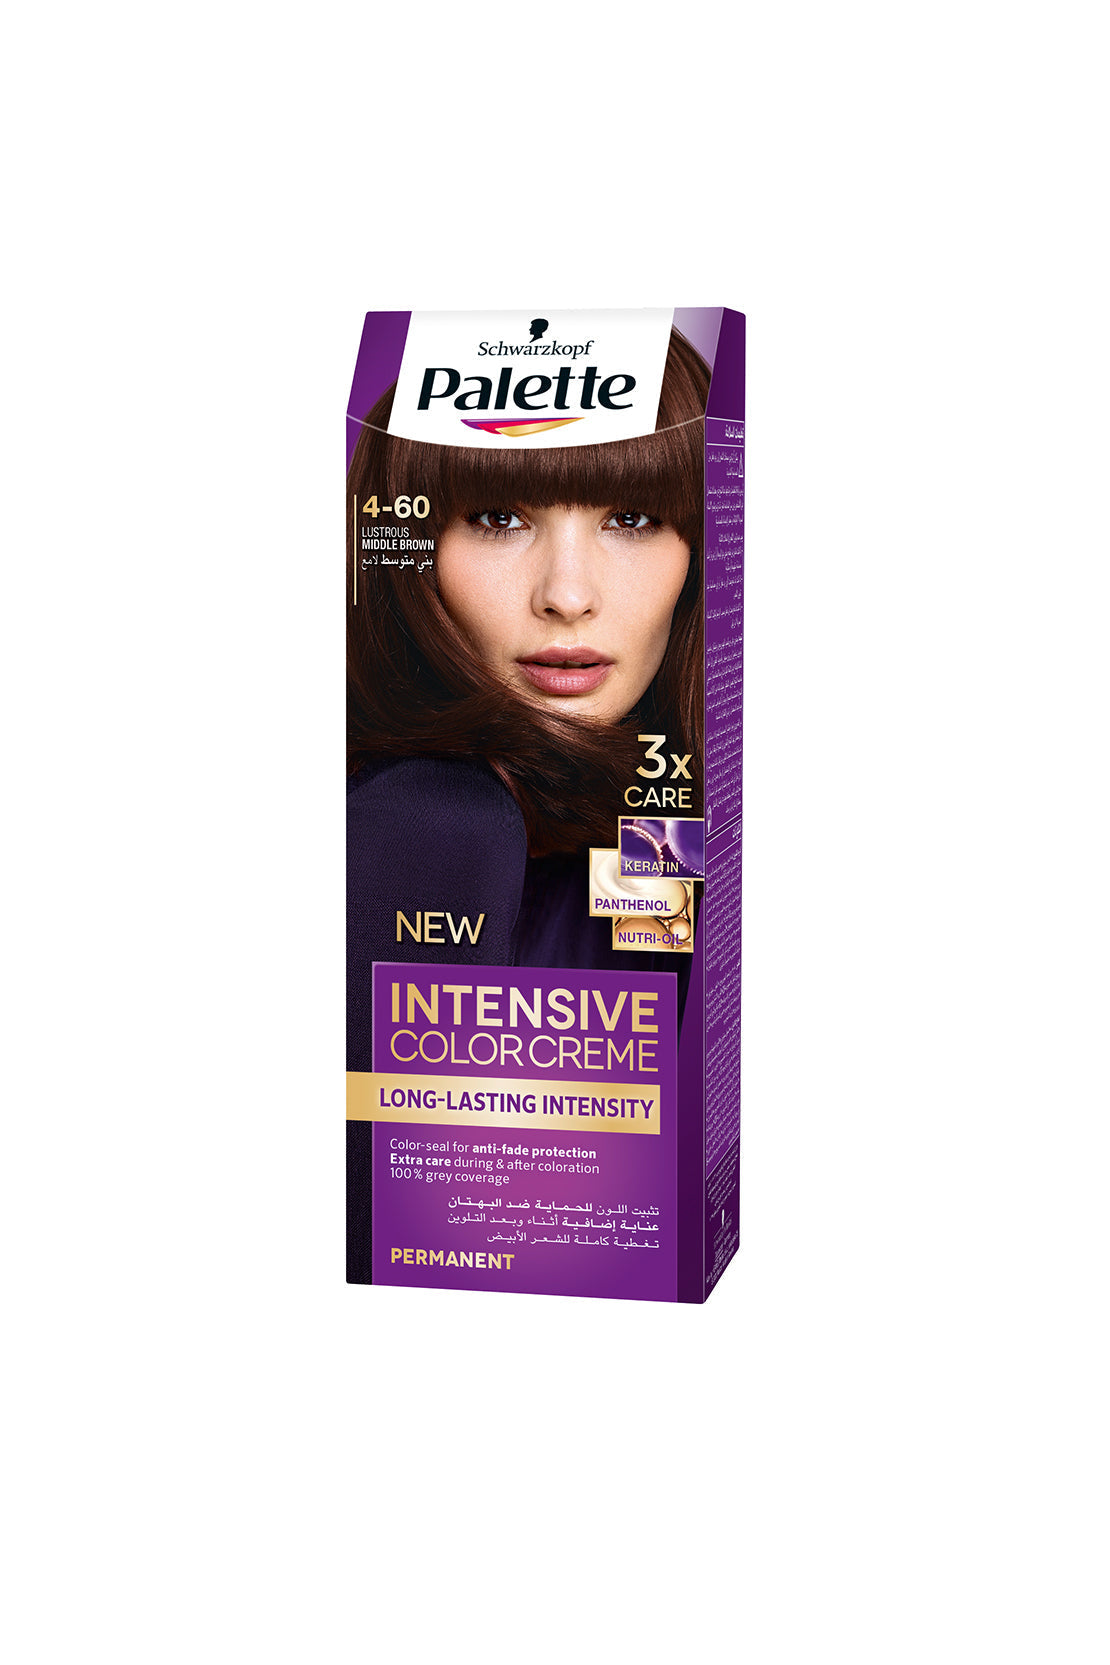 Intensive Color Creme with Long Lasting Intensity (4-60 Middle Brown) RIOS